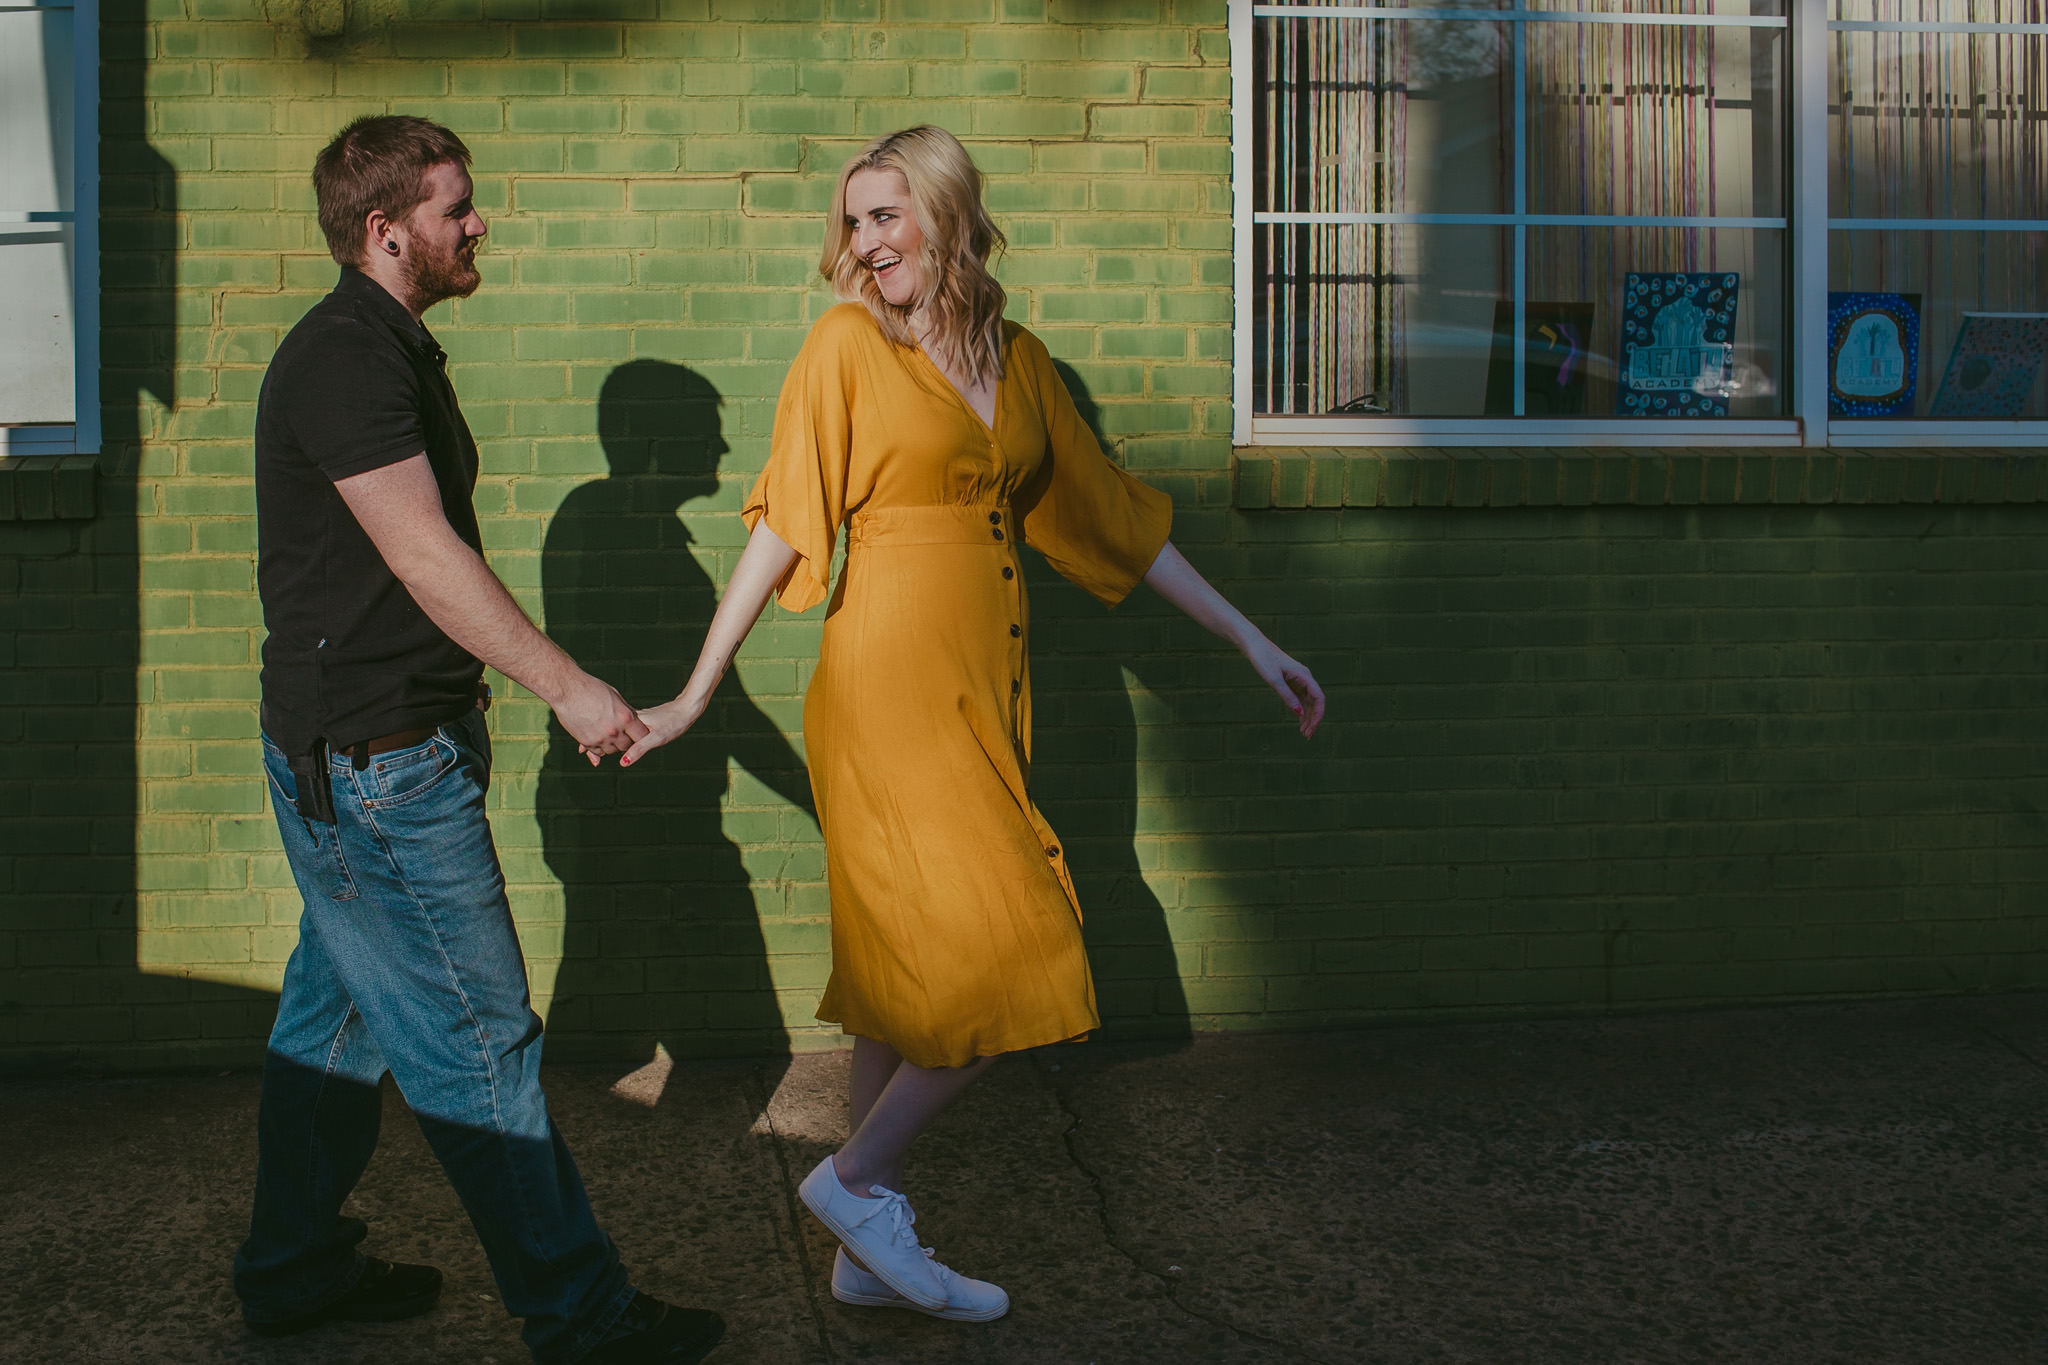 A lime green wall is a great contrast to a mustard yellow dress for this colorful maternity session on the streets of NoDa